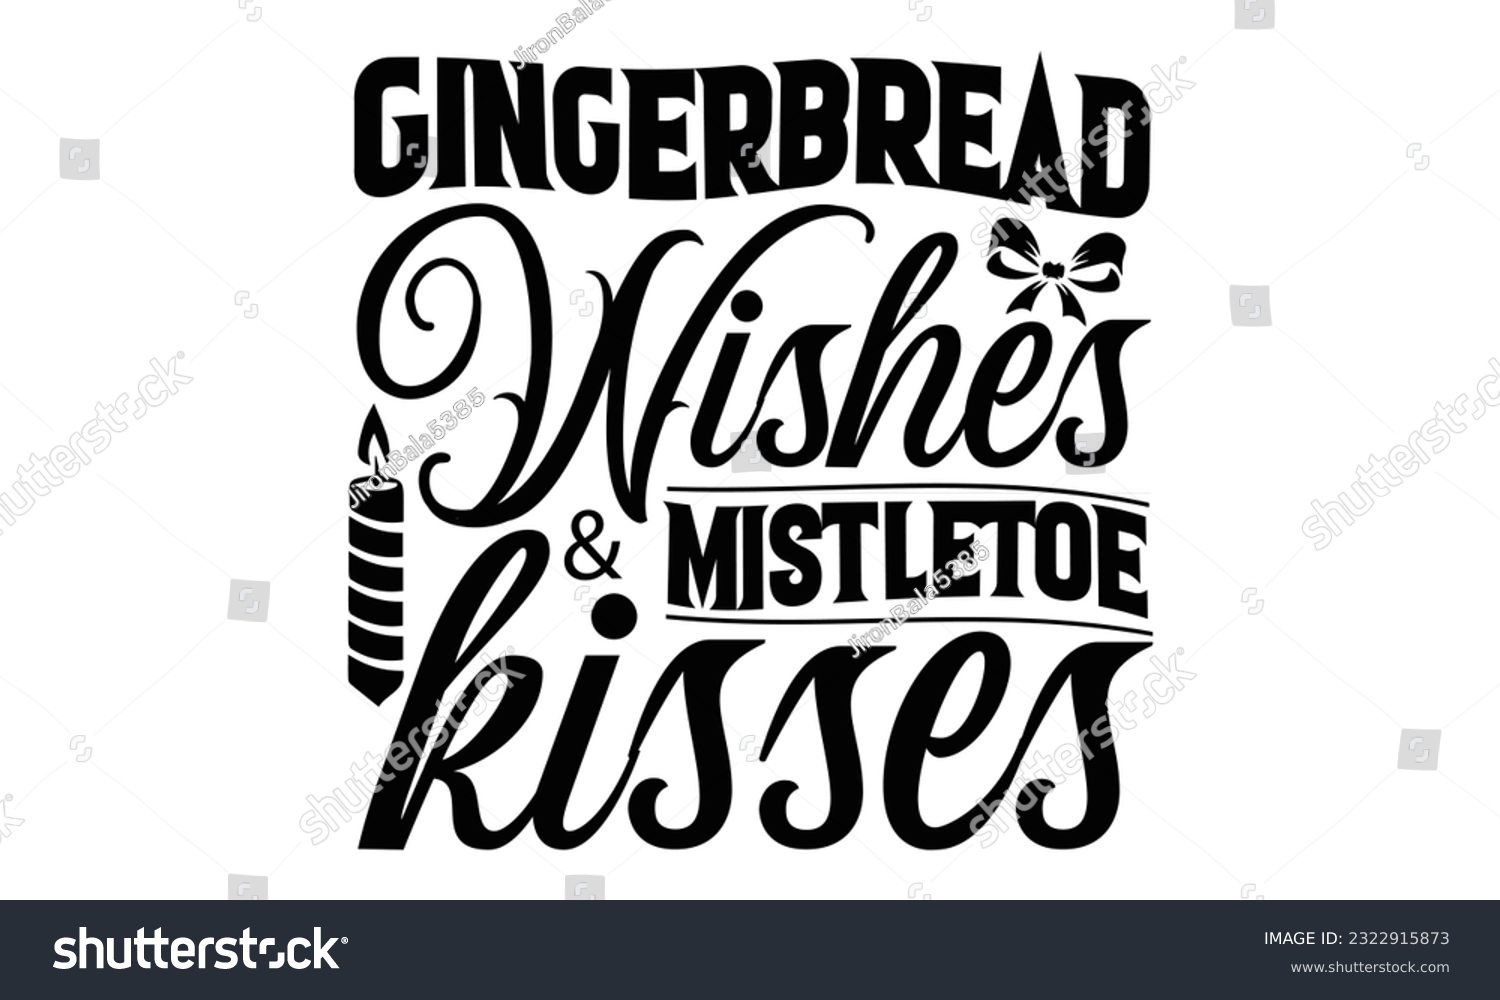 SVG of  Gingerbread Wishes  Mistletoe Kisses - Christmas SVG Design, Calligraphy graphic design, this illustration can be used as a print on t-shirts, bags, stationary or as a poster. svg